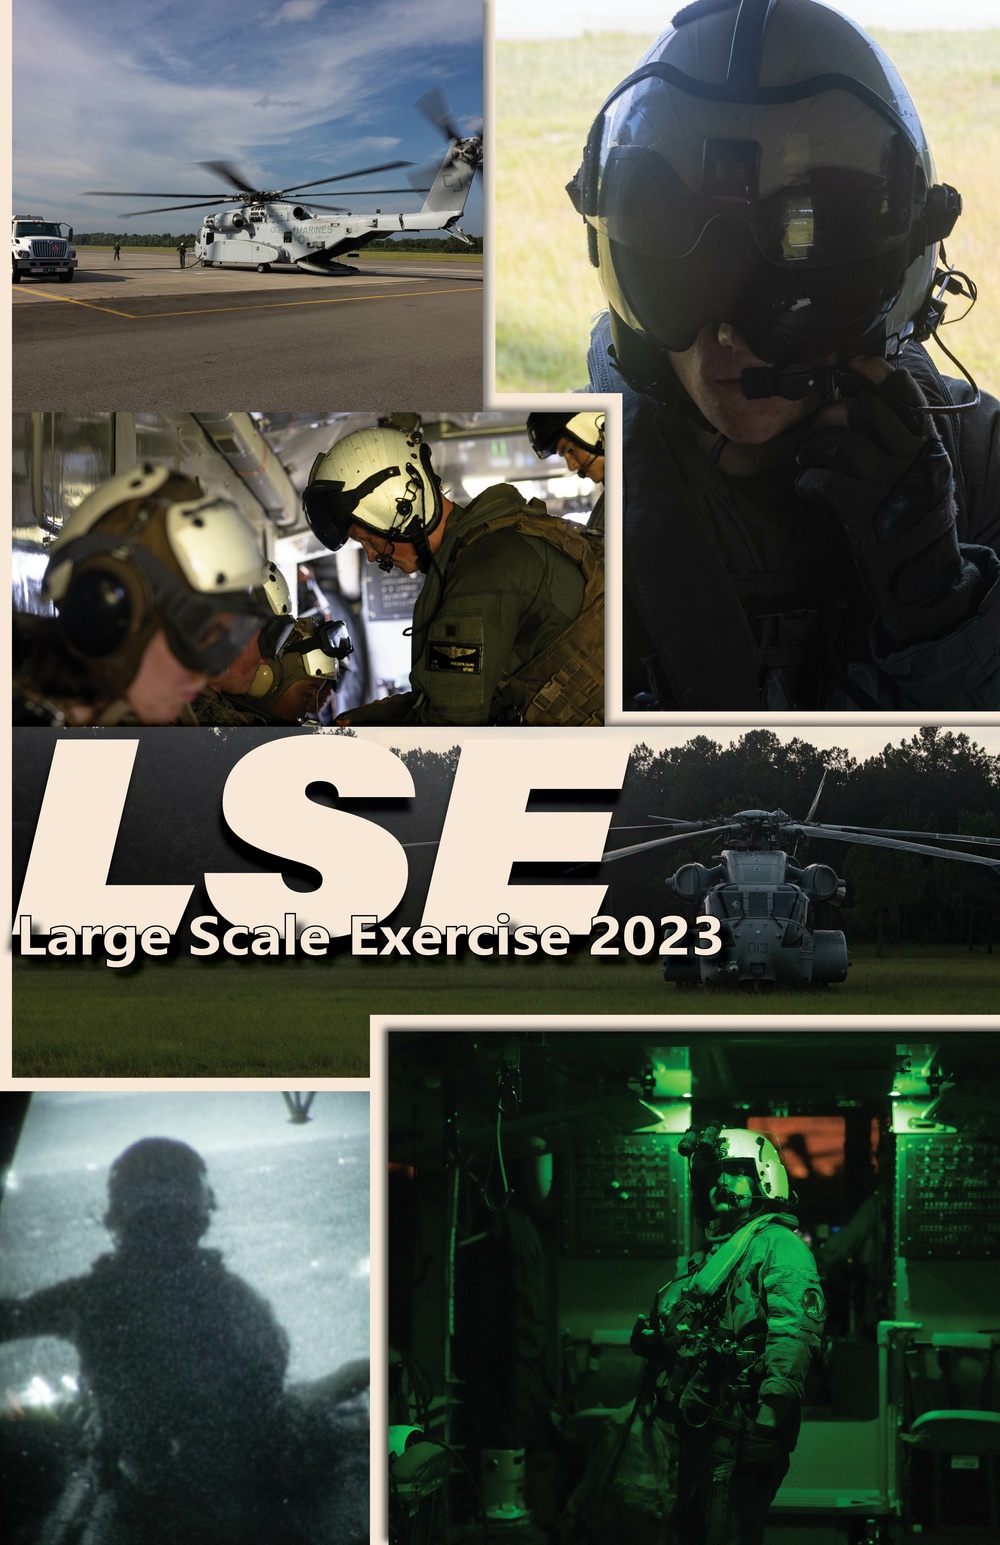 Large Scale Exercise 2023: Marine Heavy Helicopter Squadron (HMH) 461 participates in LSE 2023